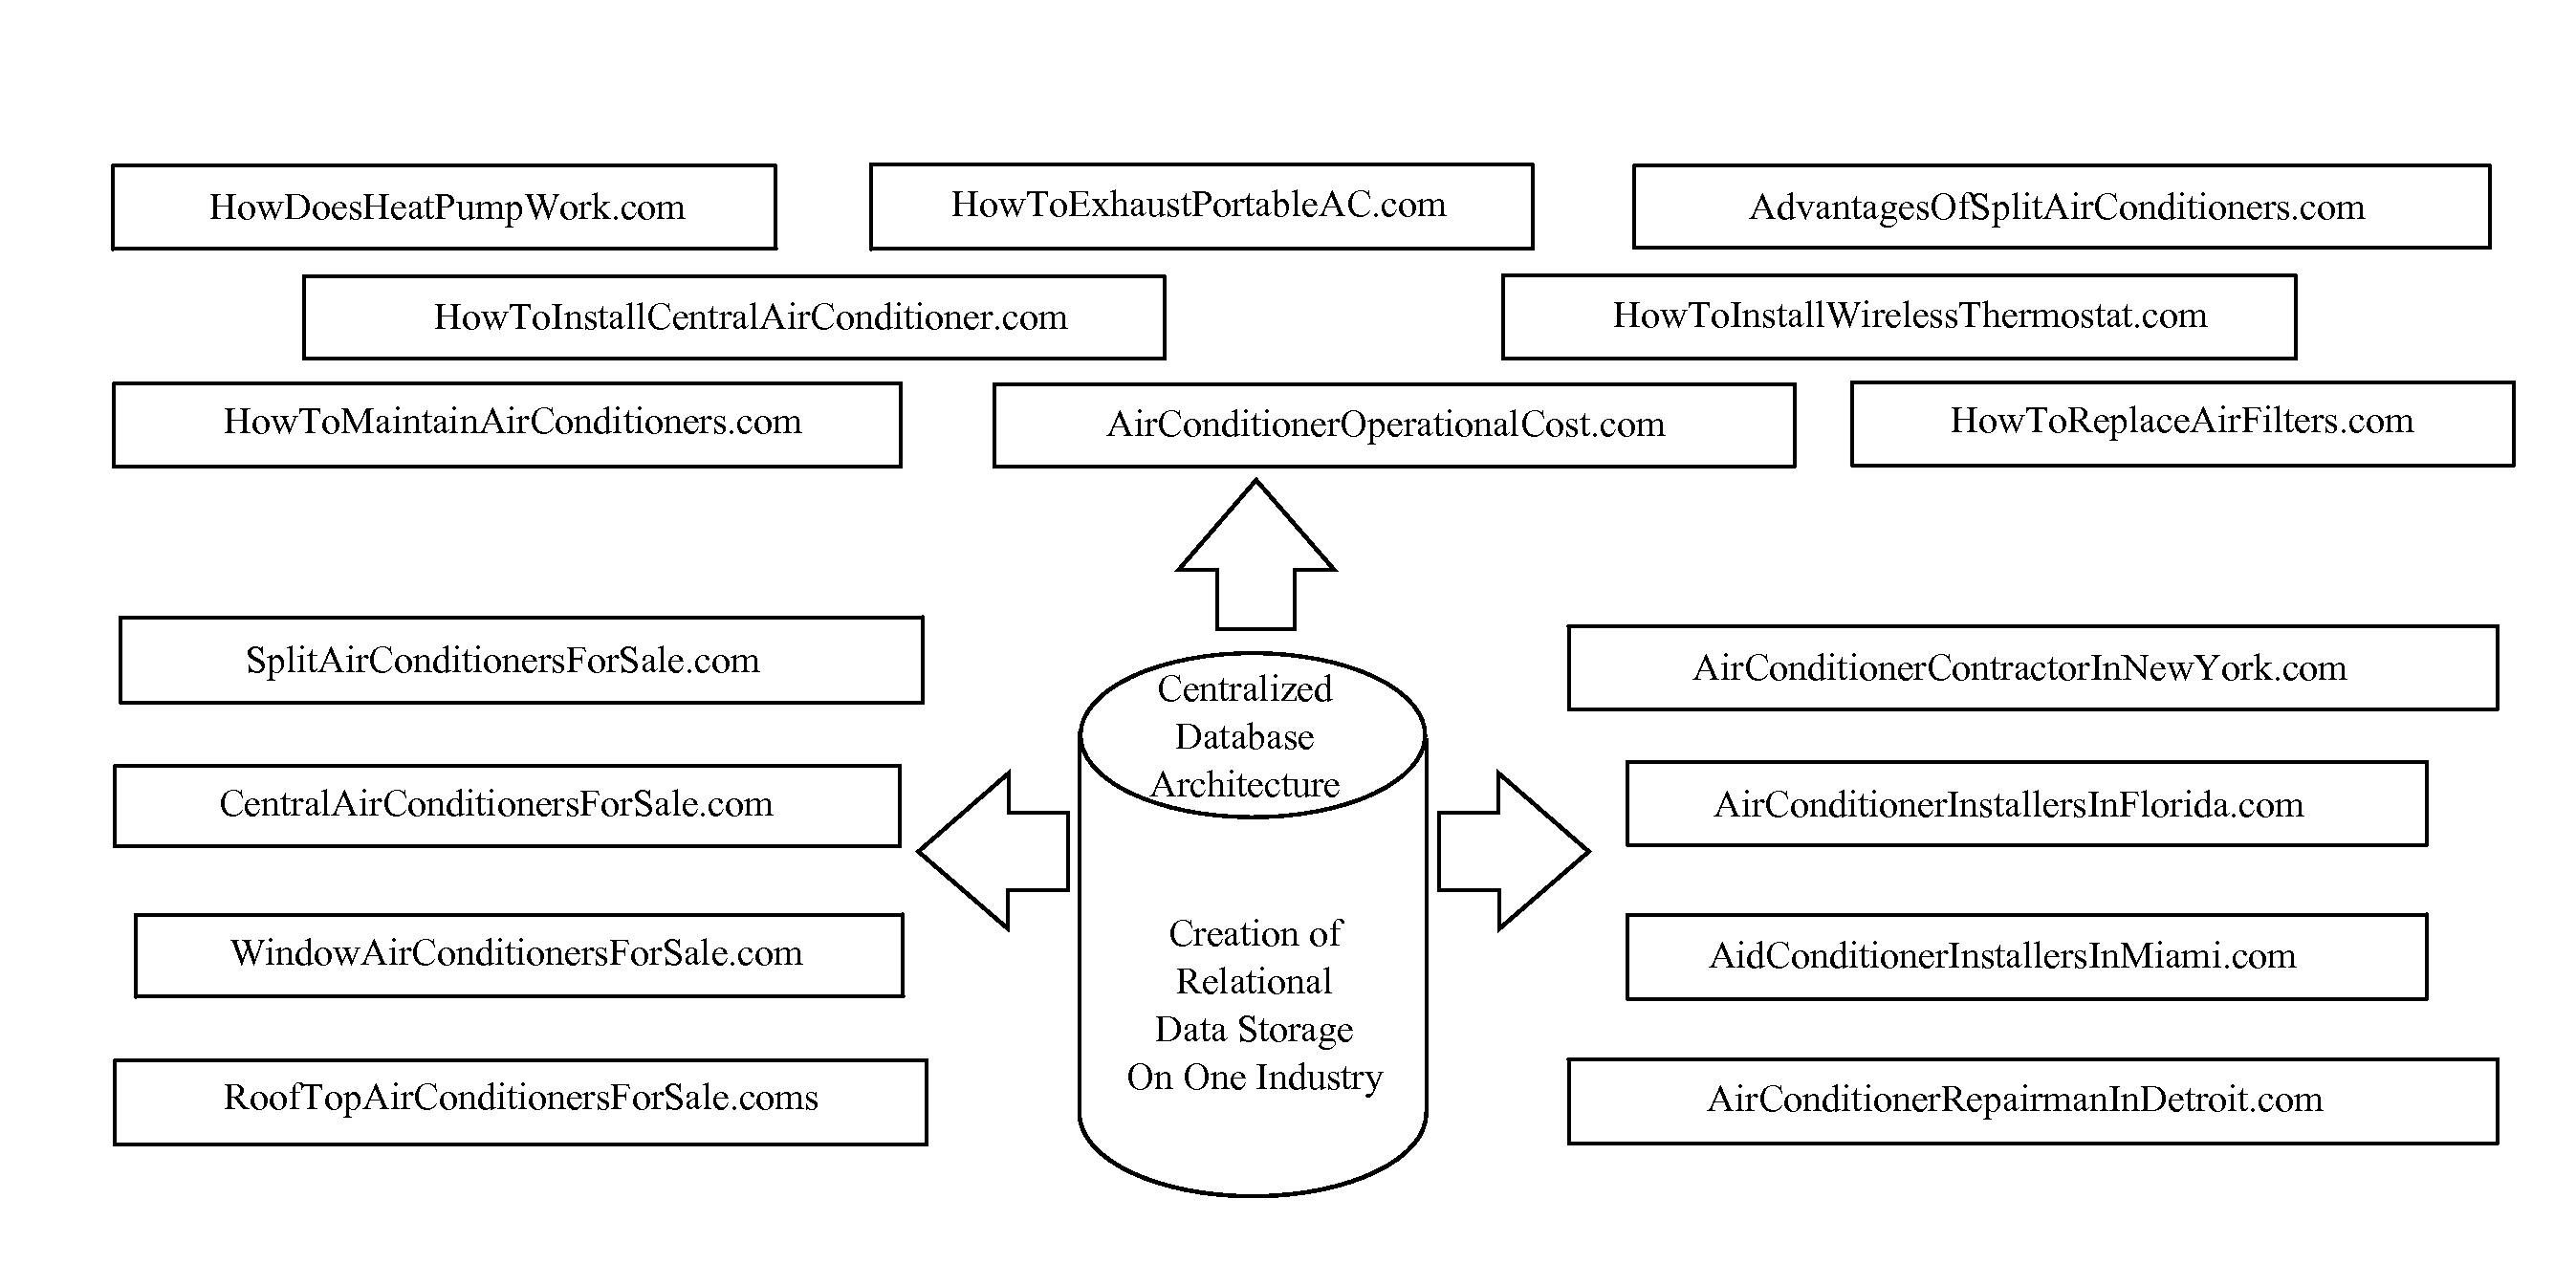 Method for Interlacing Multiple Internet domain names with a Database Driven Website to Obtain Better Webpage Ranking on Major Search Engines by Executing Computer-Executable Instructions Stored On a Non-Transitory Computer-Readable Medium